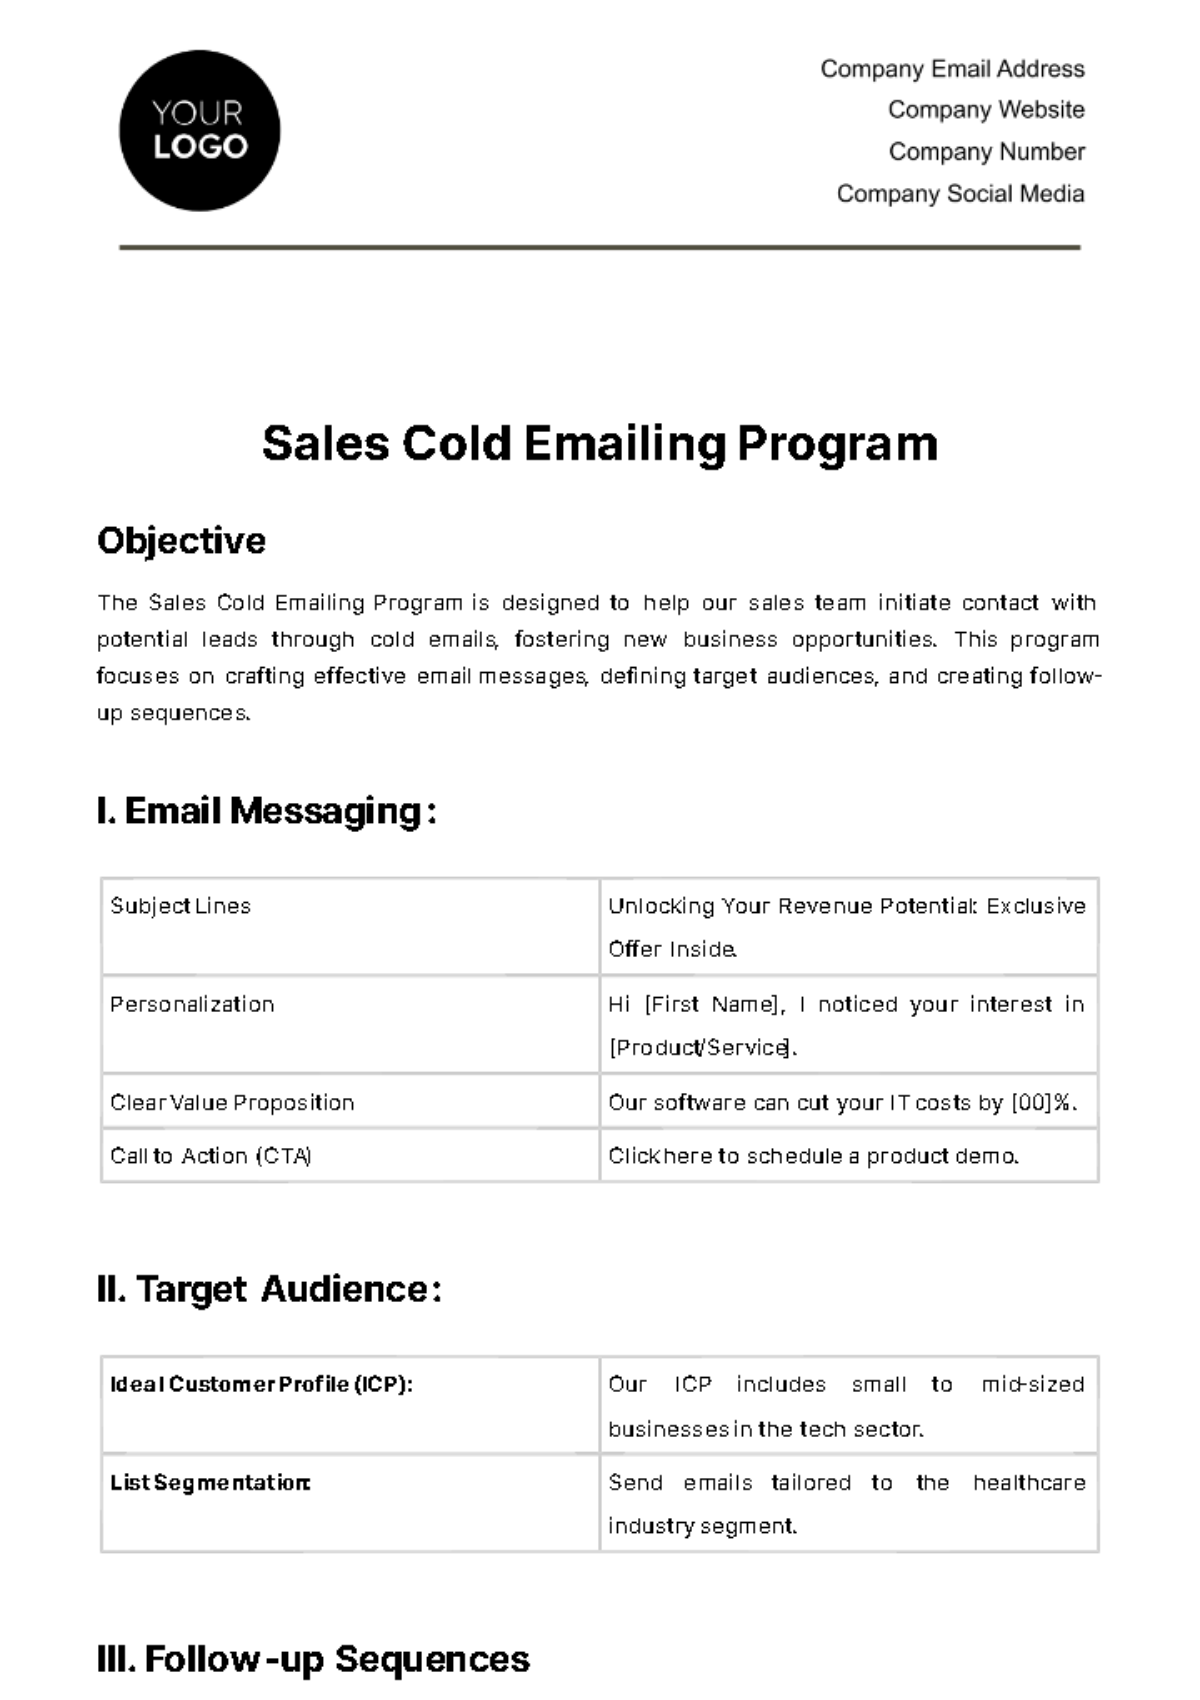 Sales Cold Emailing Program Template